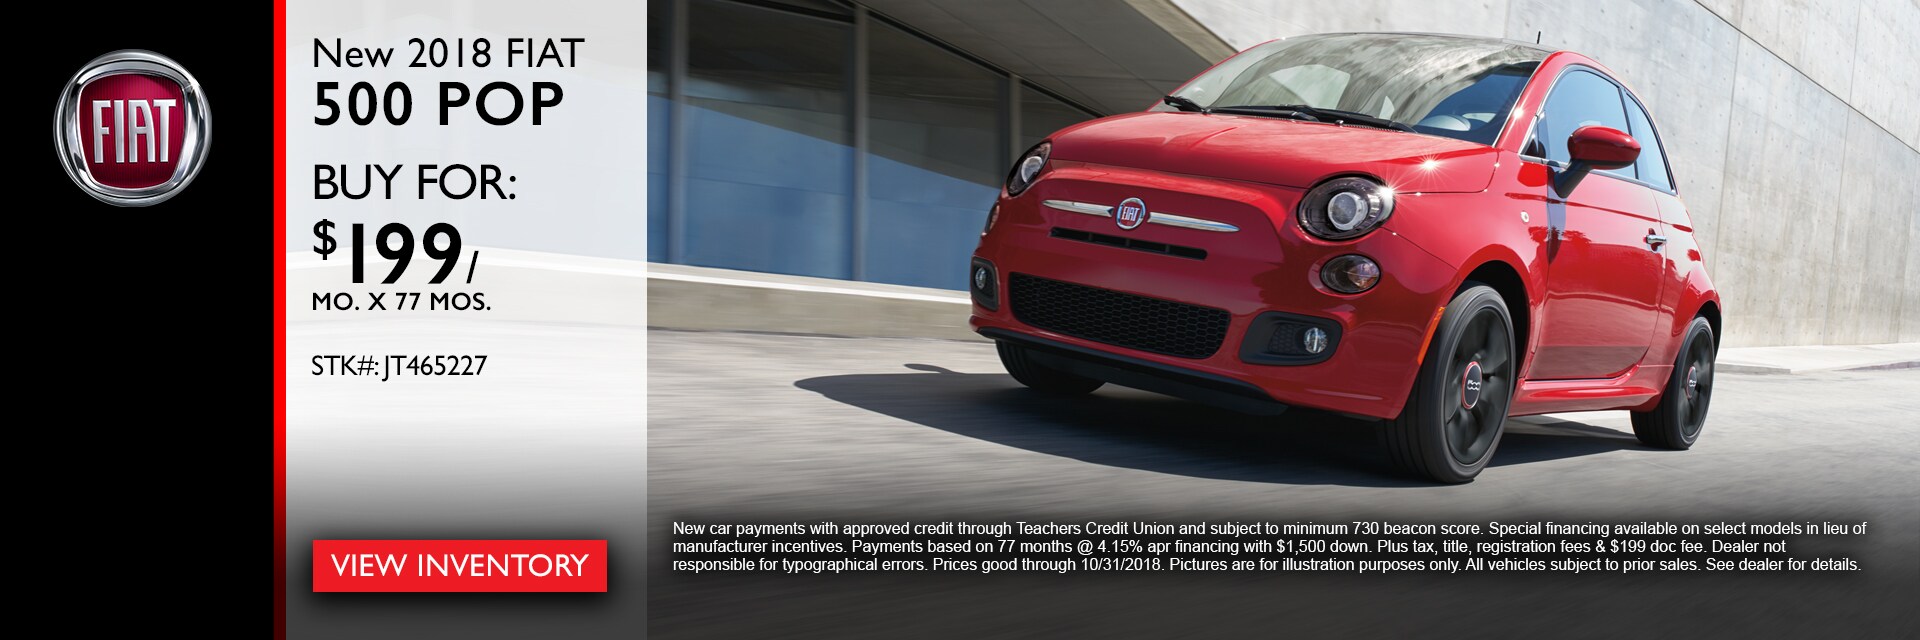 View Fiat 500 Inventory